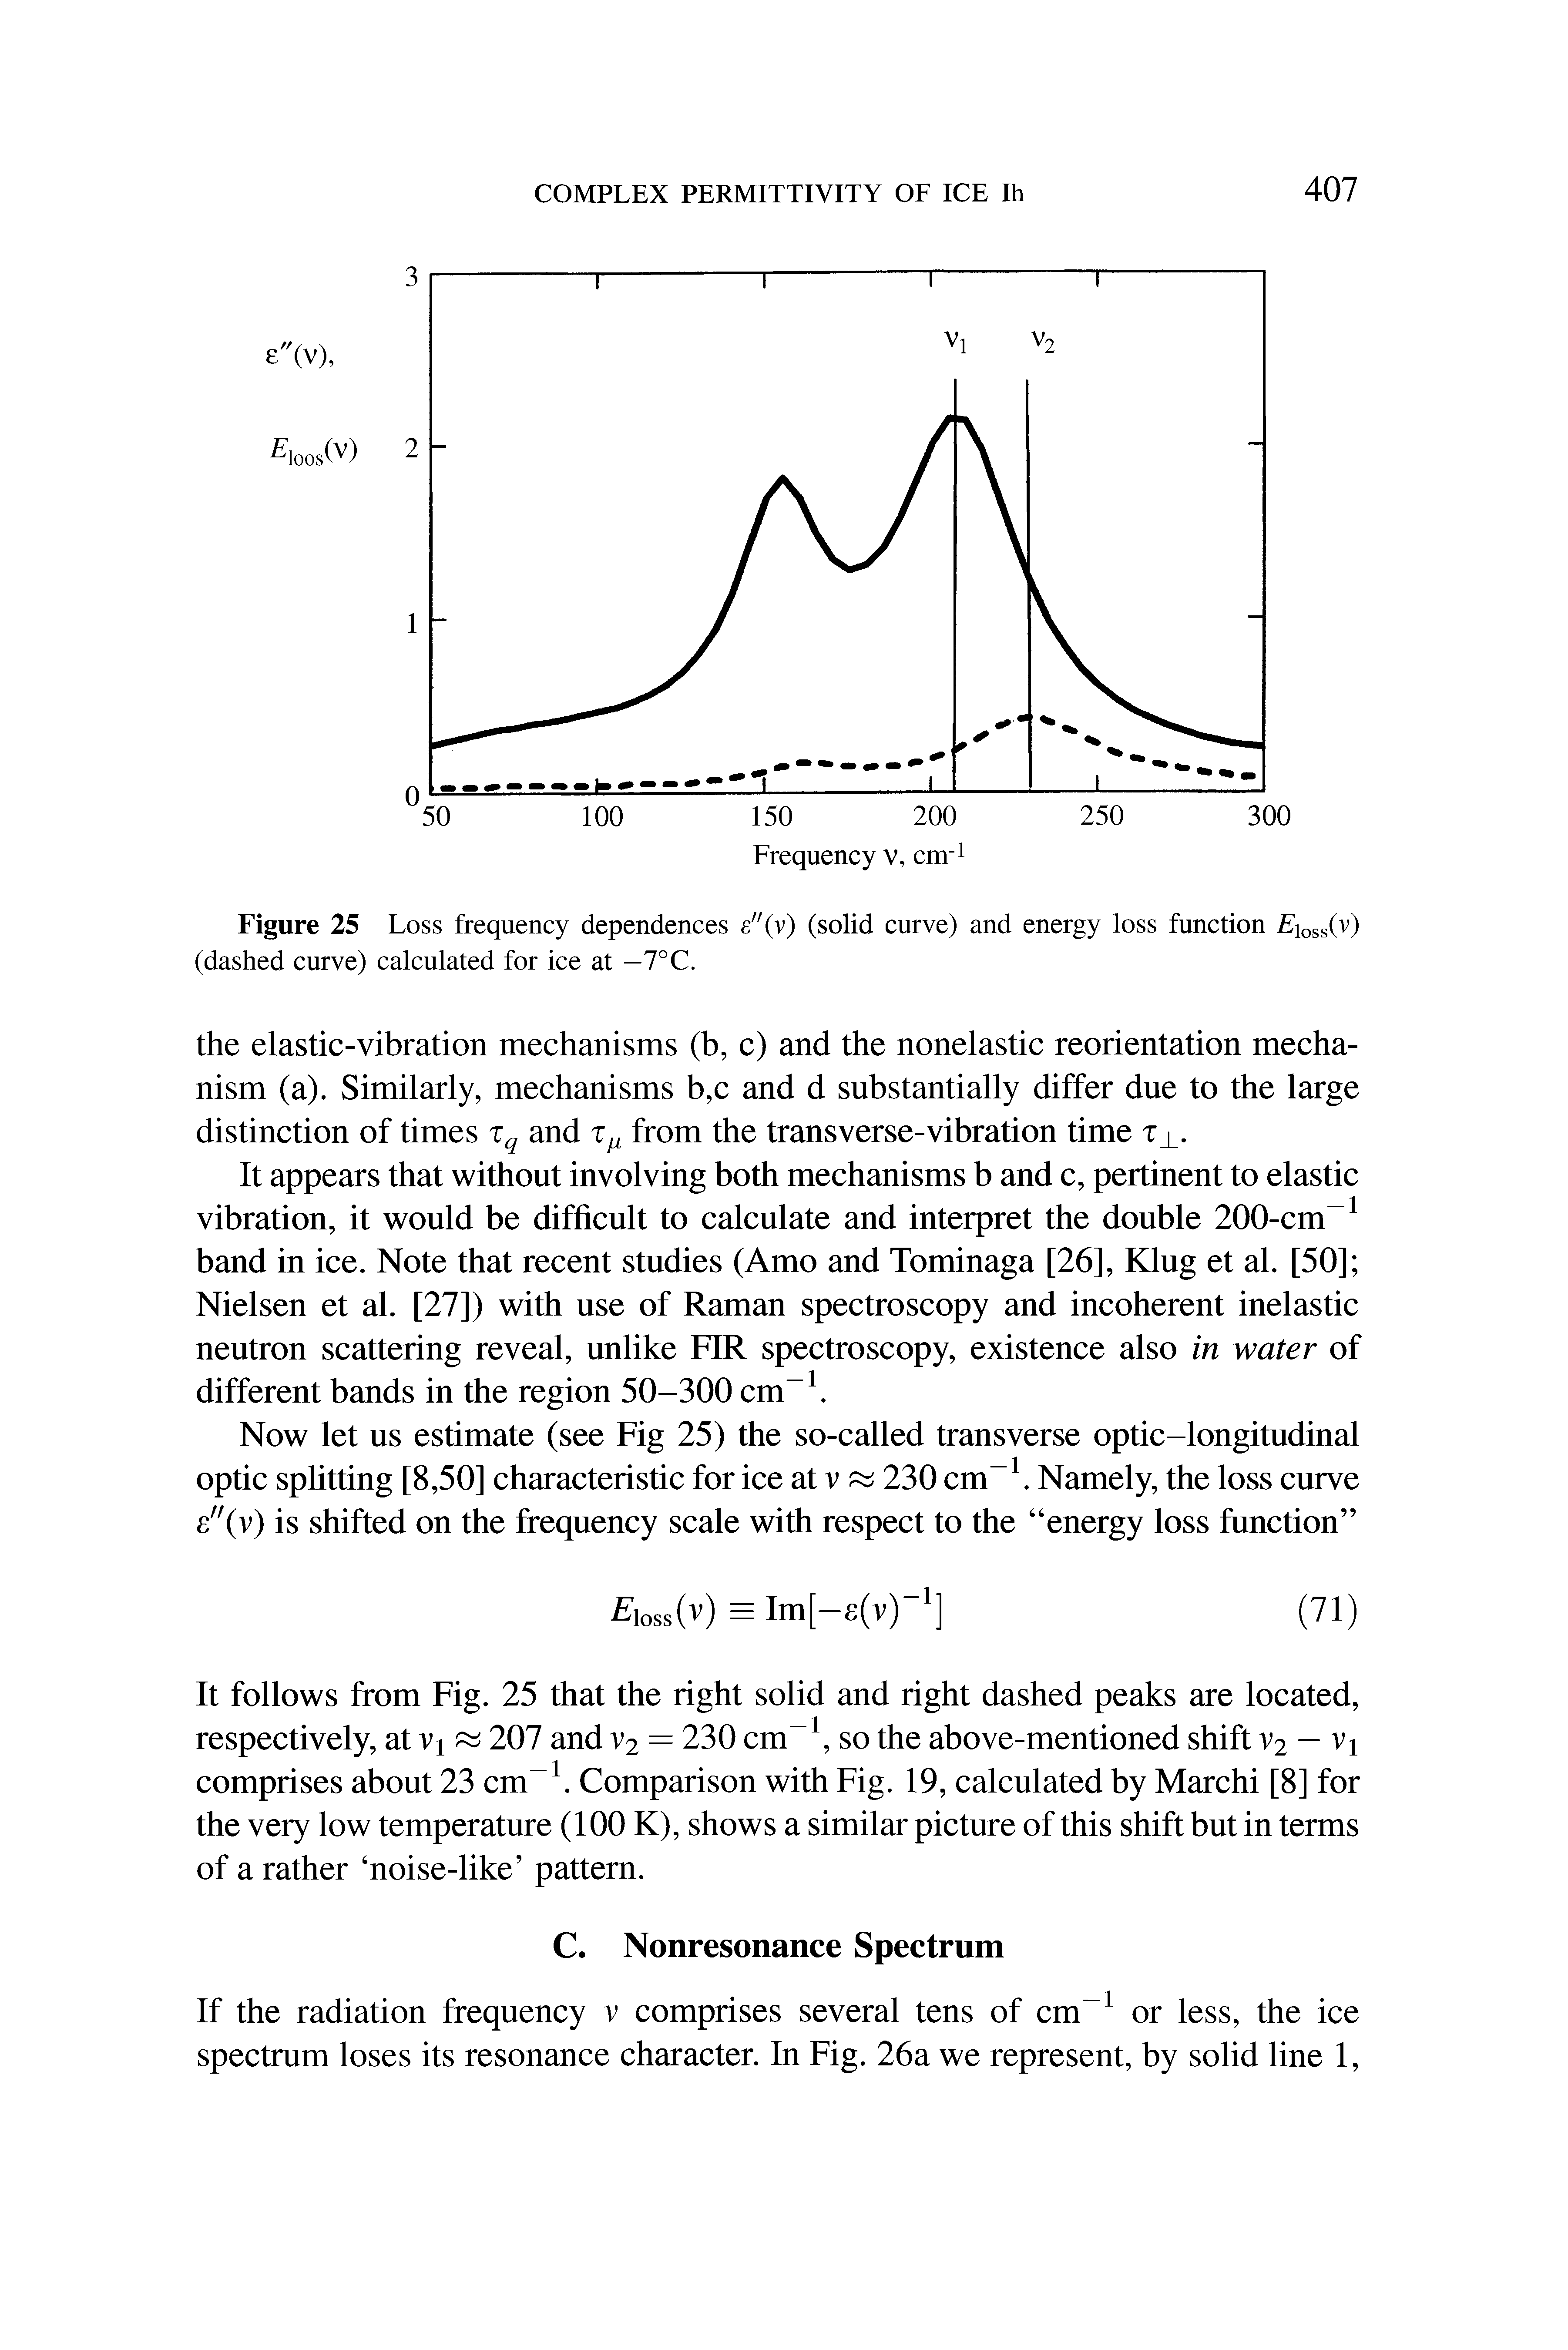 Figure 25 Loss frequency dependences e"(v) (solid curve) and energy loss function Eioss(v) (dashed curve) calculated for ice at —7°C.